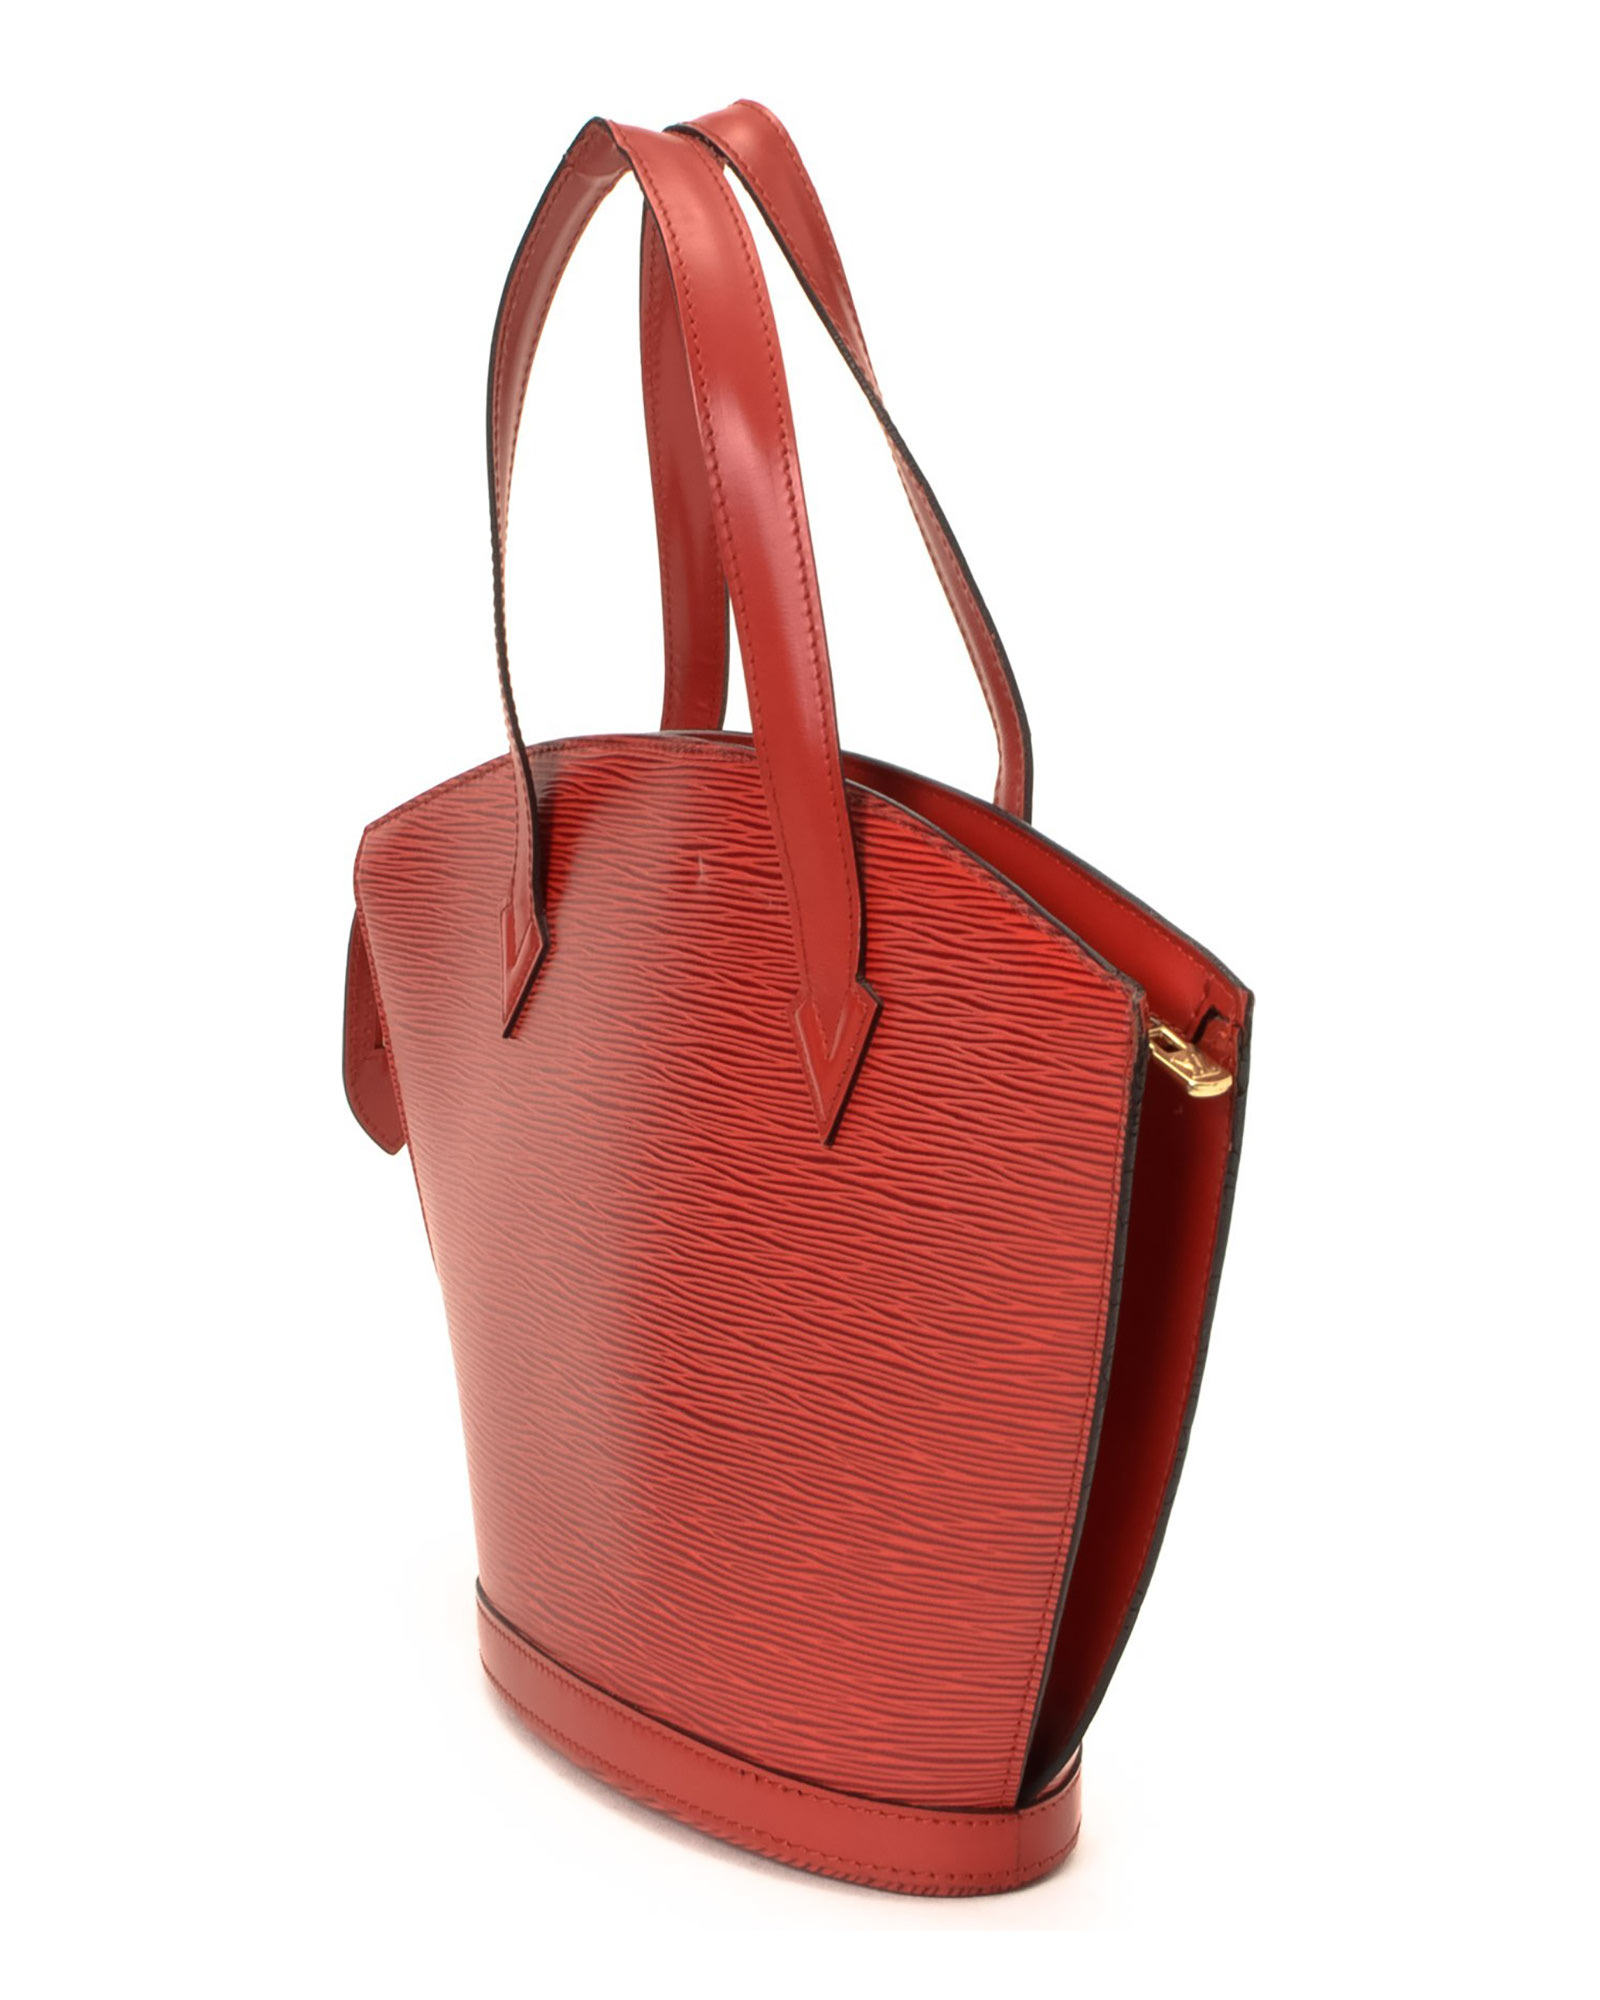 Lyst - Louis Vuitton Red Tote Bag - Vintage in Red